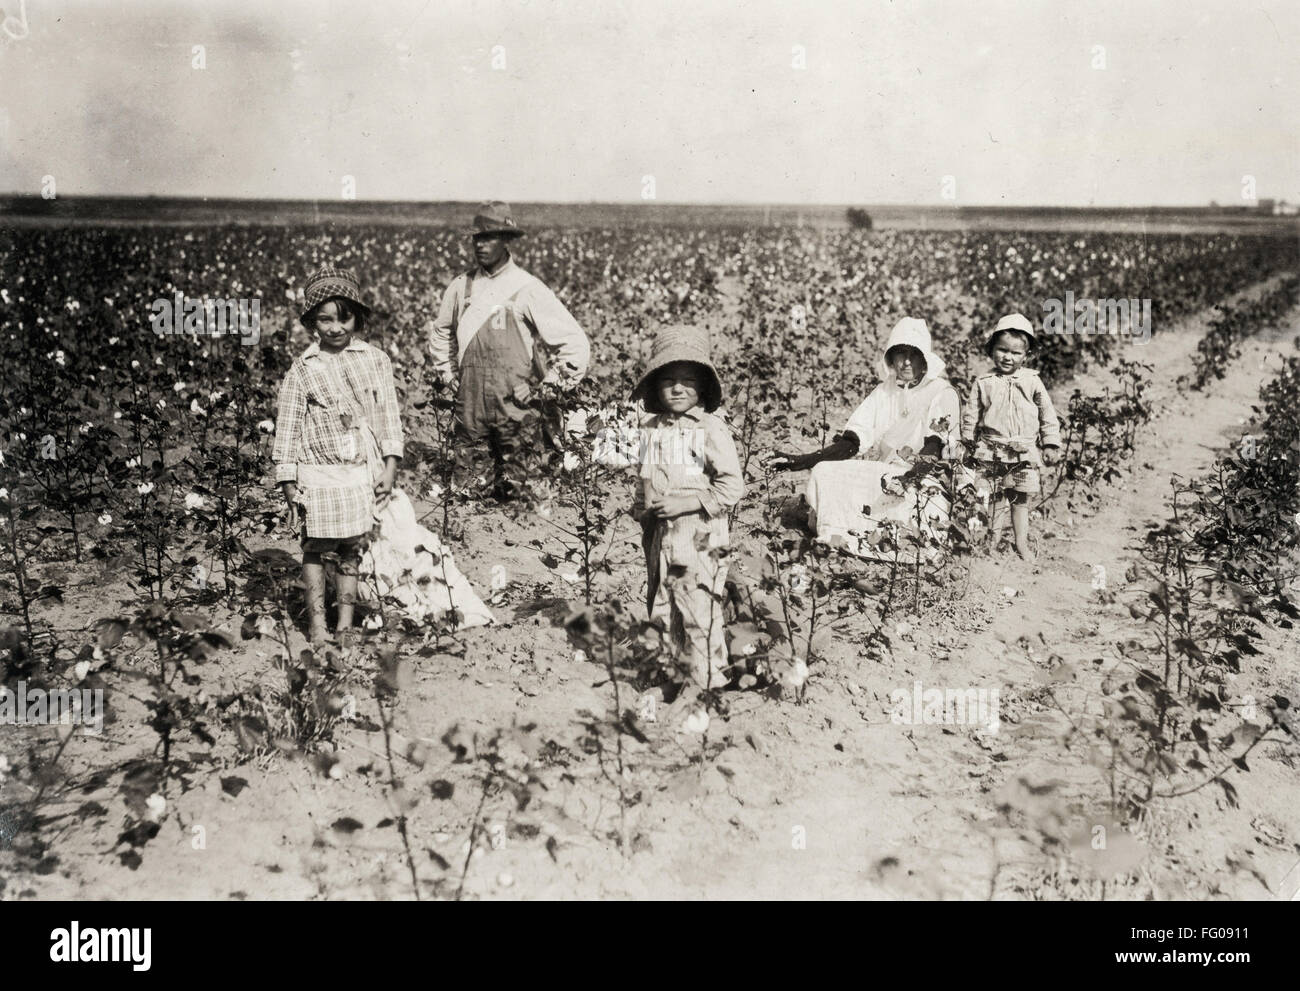 HINE: COTTON PICKING, 1916. /nThe Walker family picking cotton in Geronimo, Oklahoma. Photograph by Lewis Hine, October 1916. Stock Photo